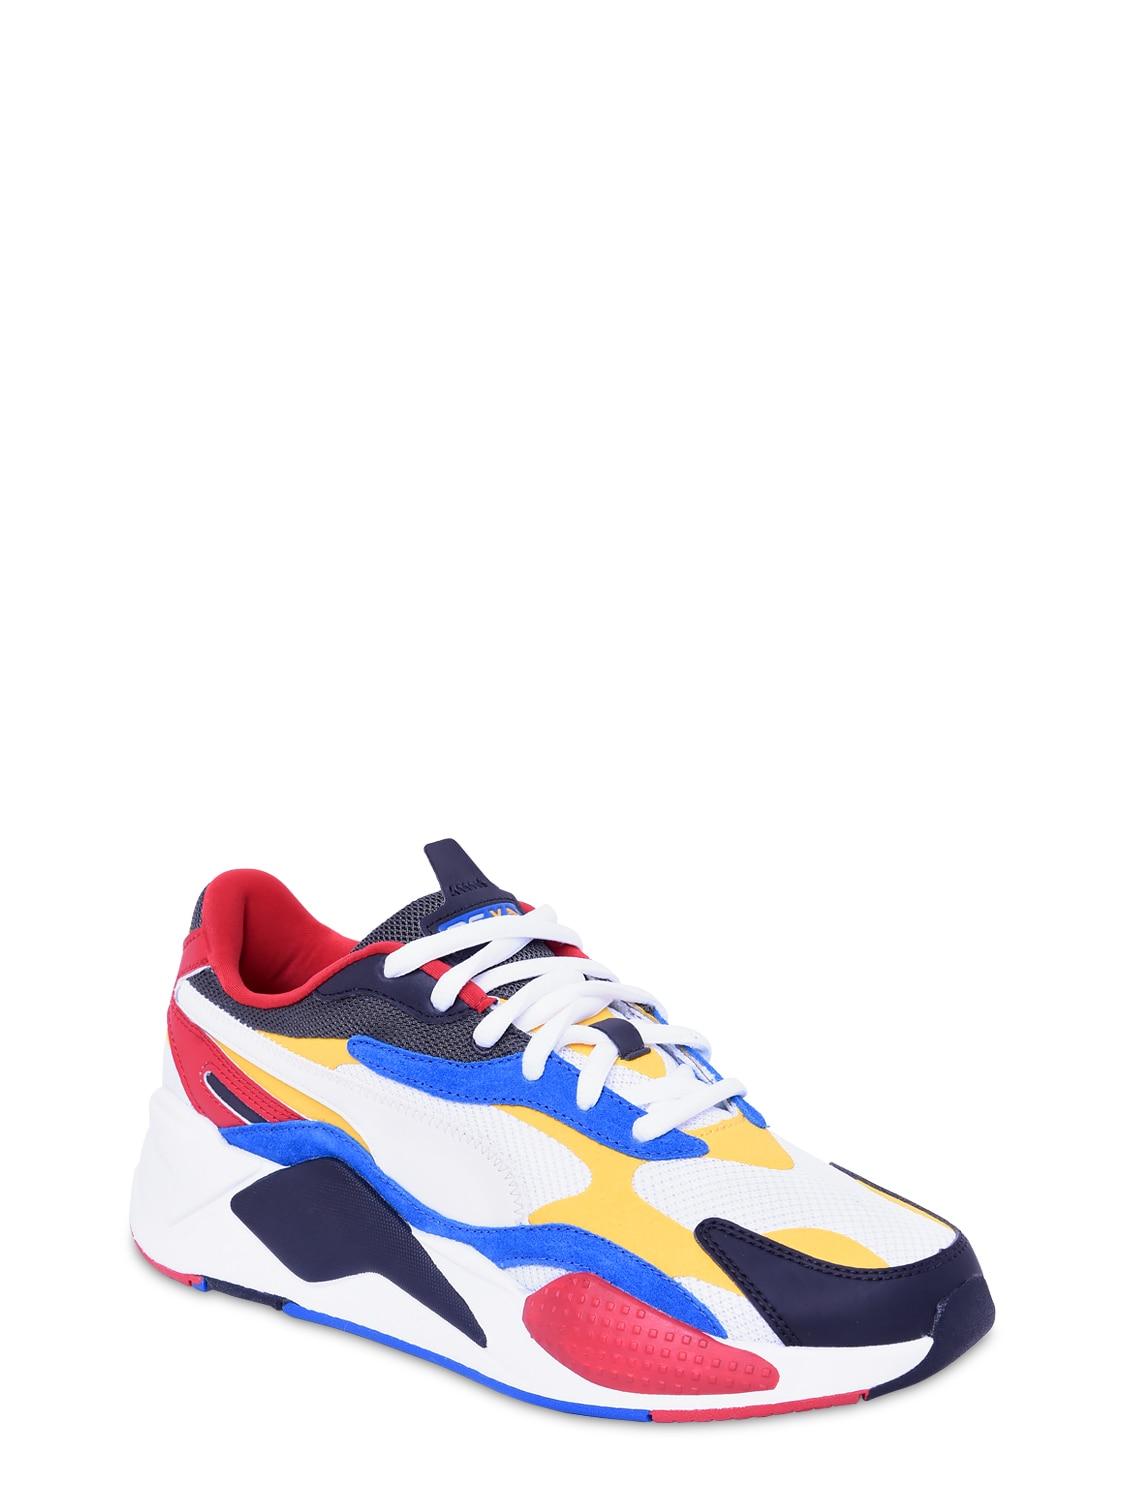 Puma Select Rs-x3 Puzzle Sneakers in Blue | Lyst